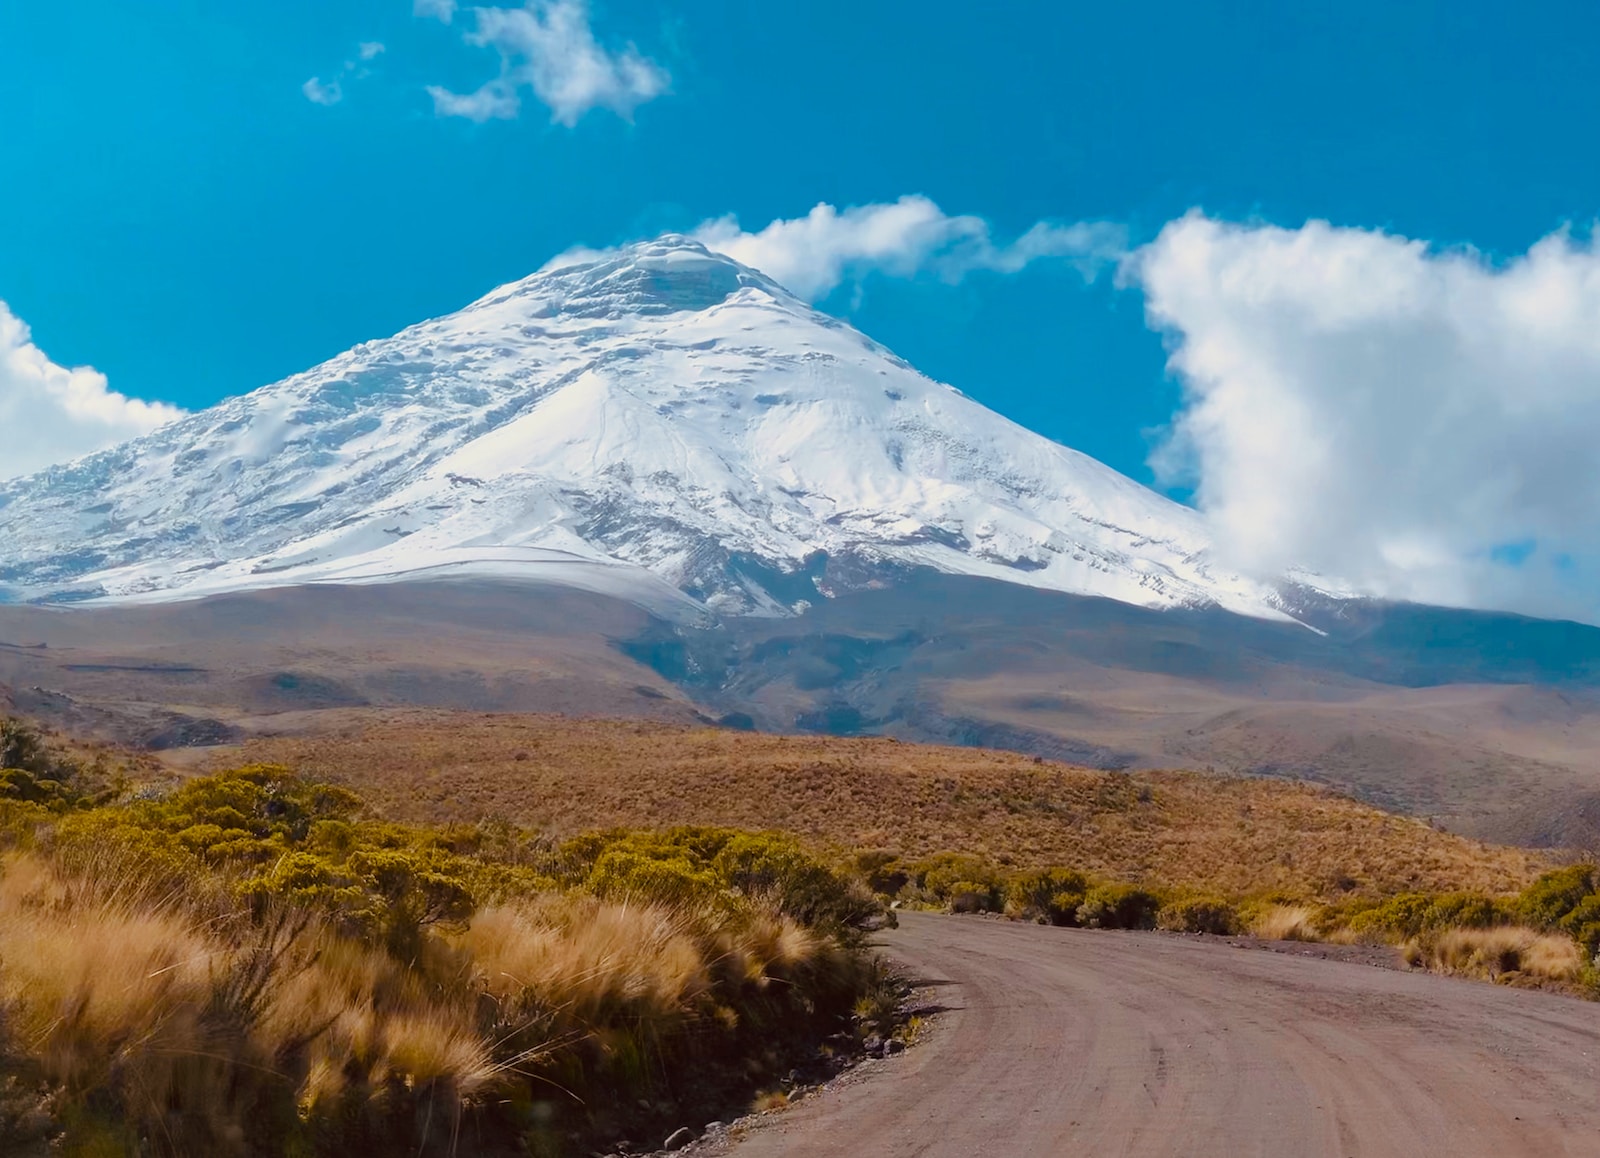 Cotopaxi white and black mountain under blue sky during daytime